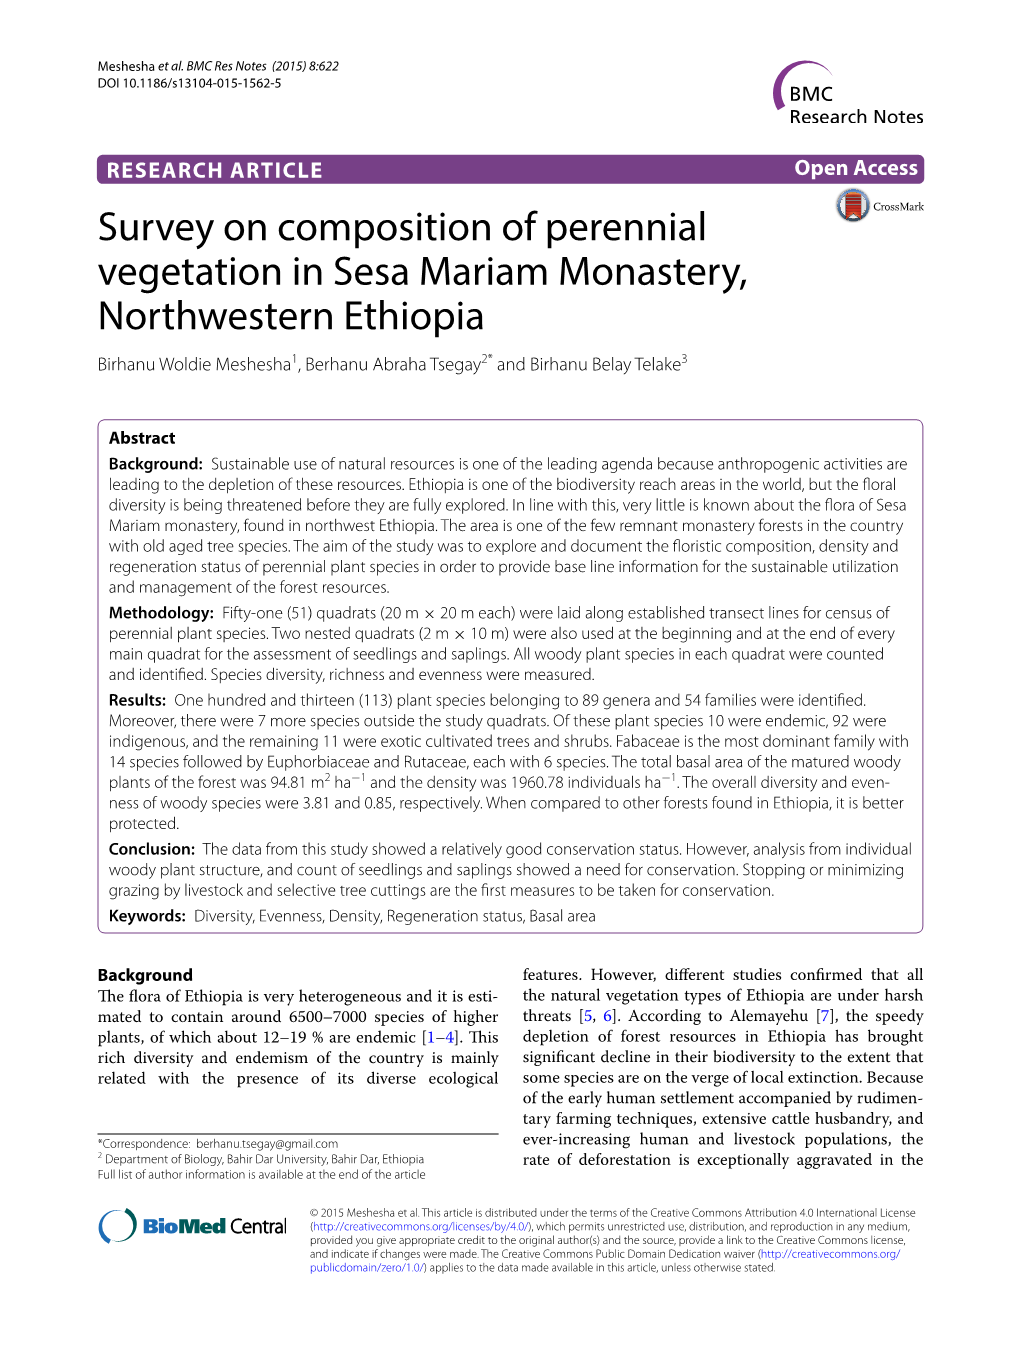 Survey on Composition of Perennial Vegetation in Sesa Mariam